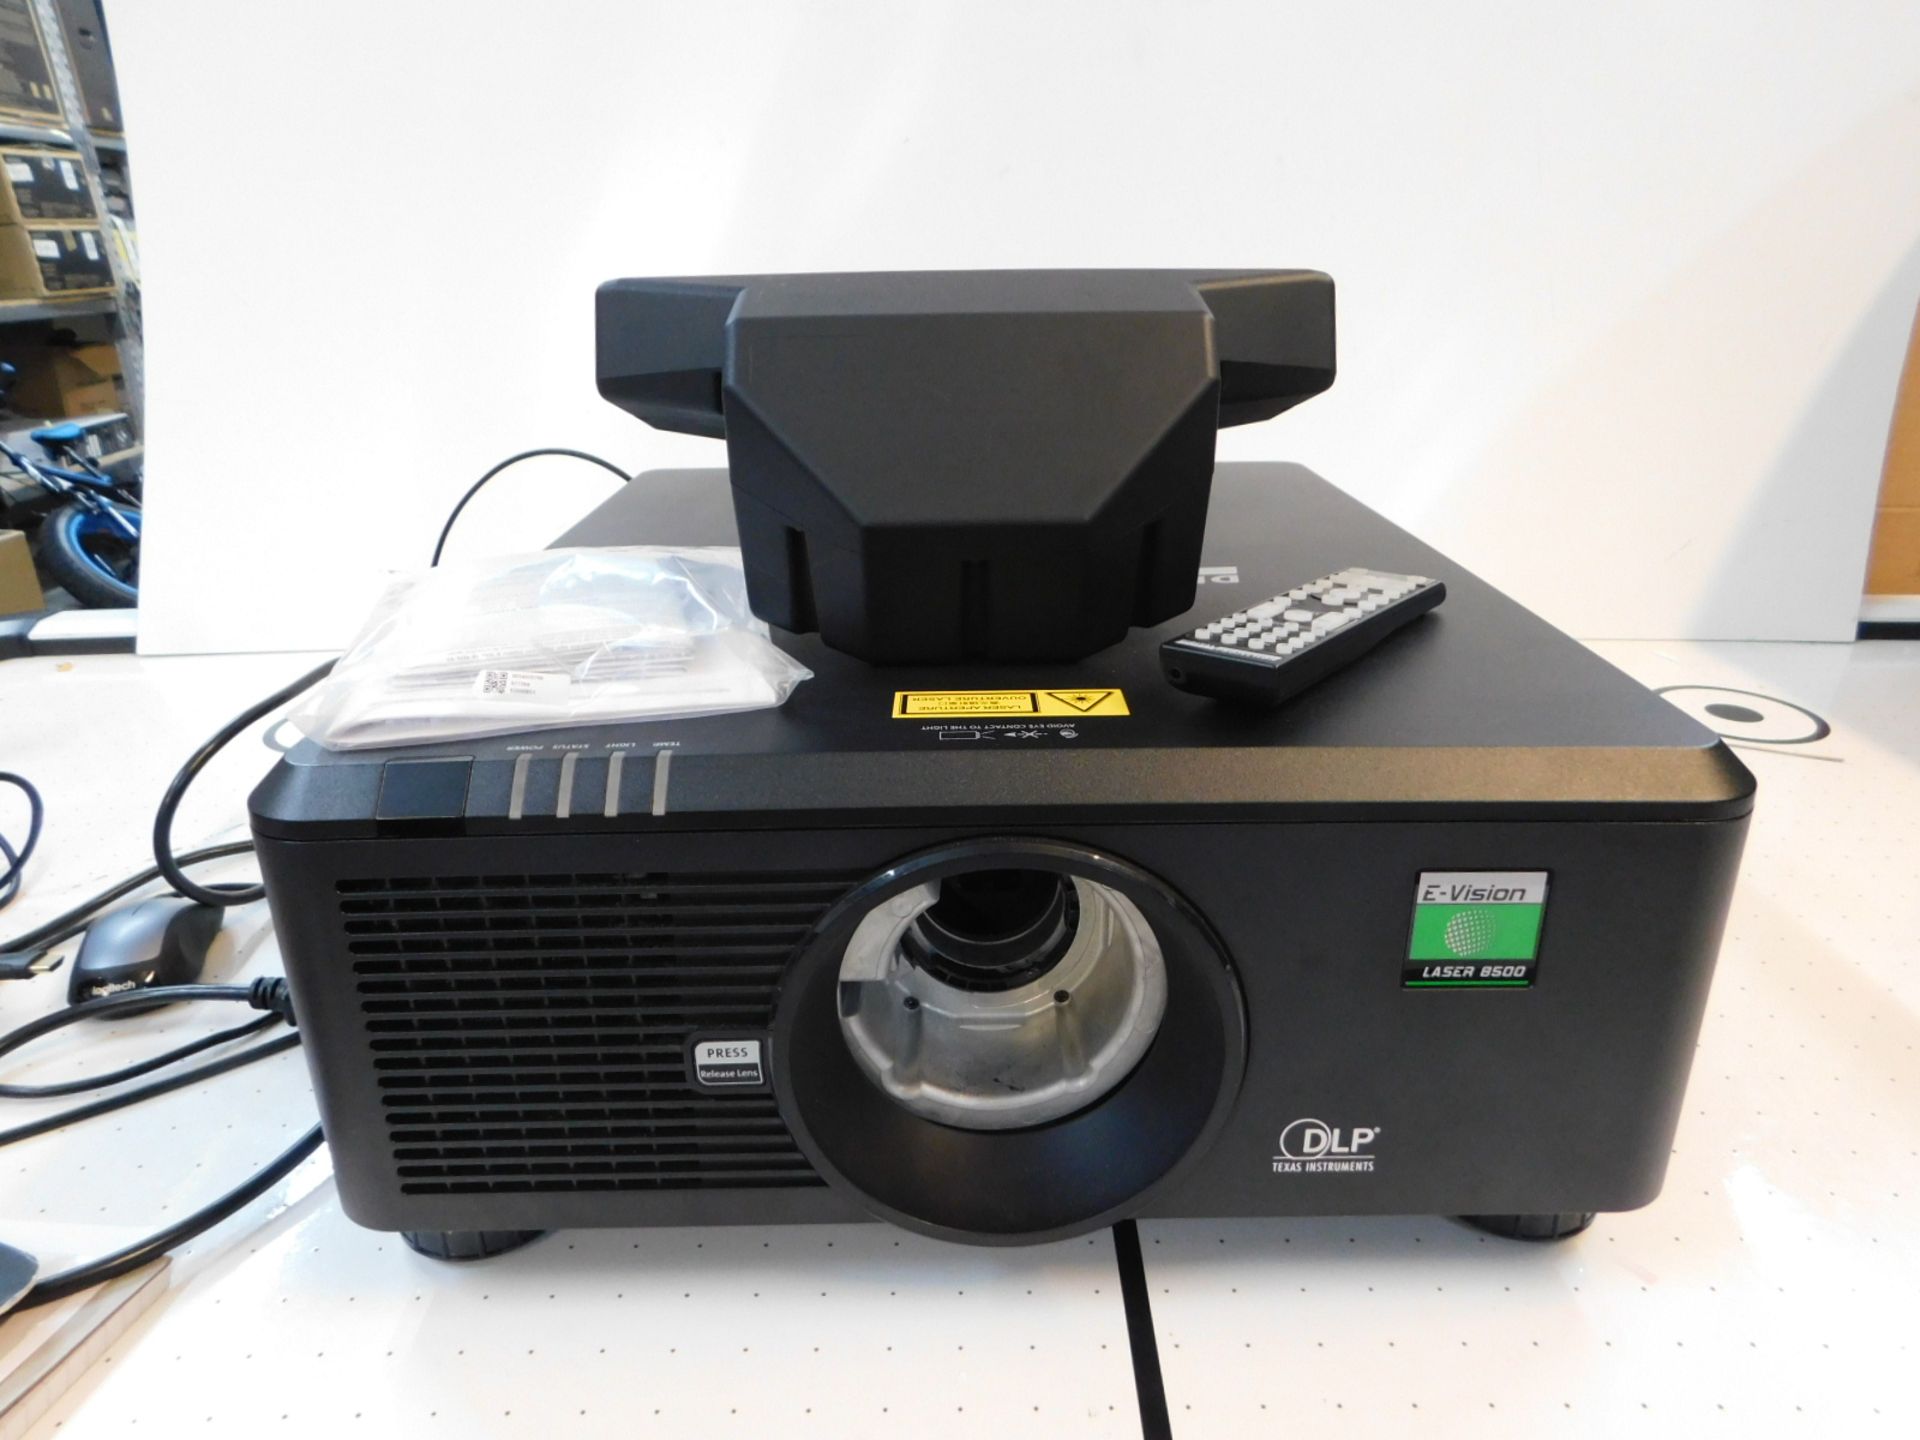 1 BOXED DIGITAL PROJECTION E-VISION LASER 8500 DLP LASER PROJECTOR & 0.38:1 (117-341A) SHORT THROW